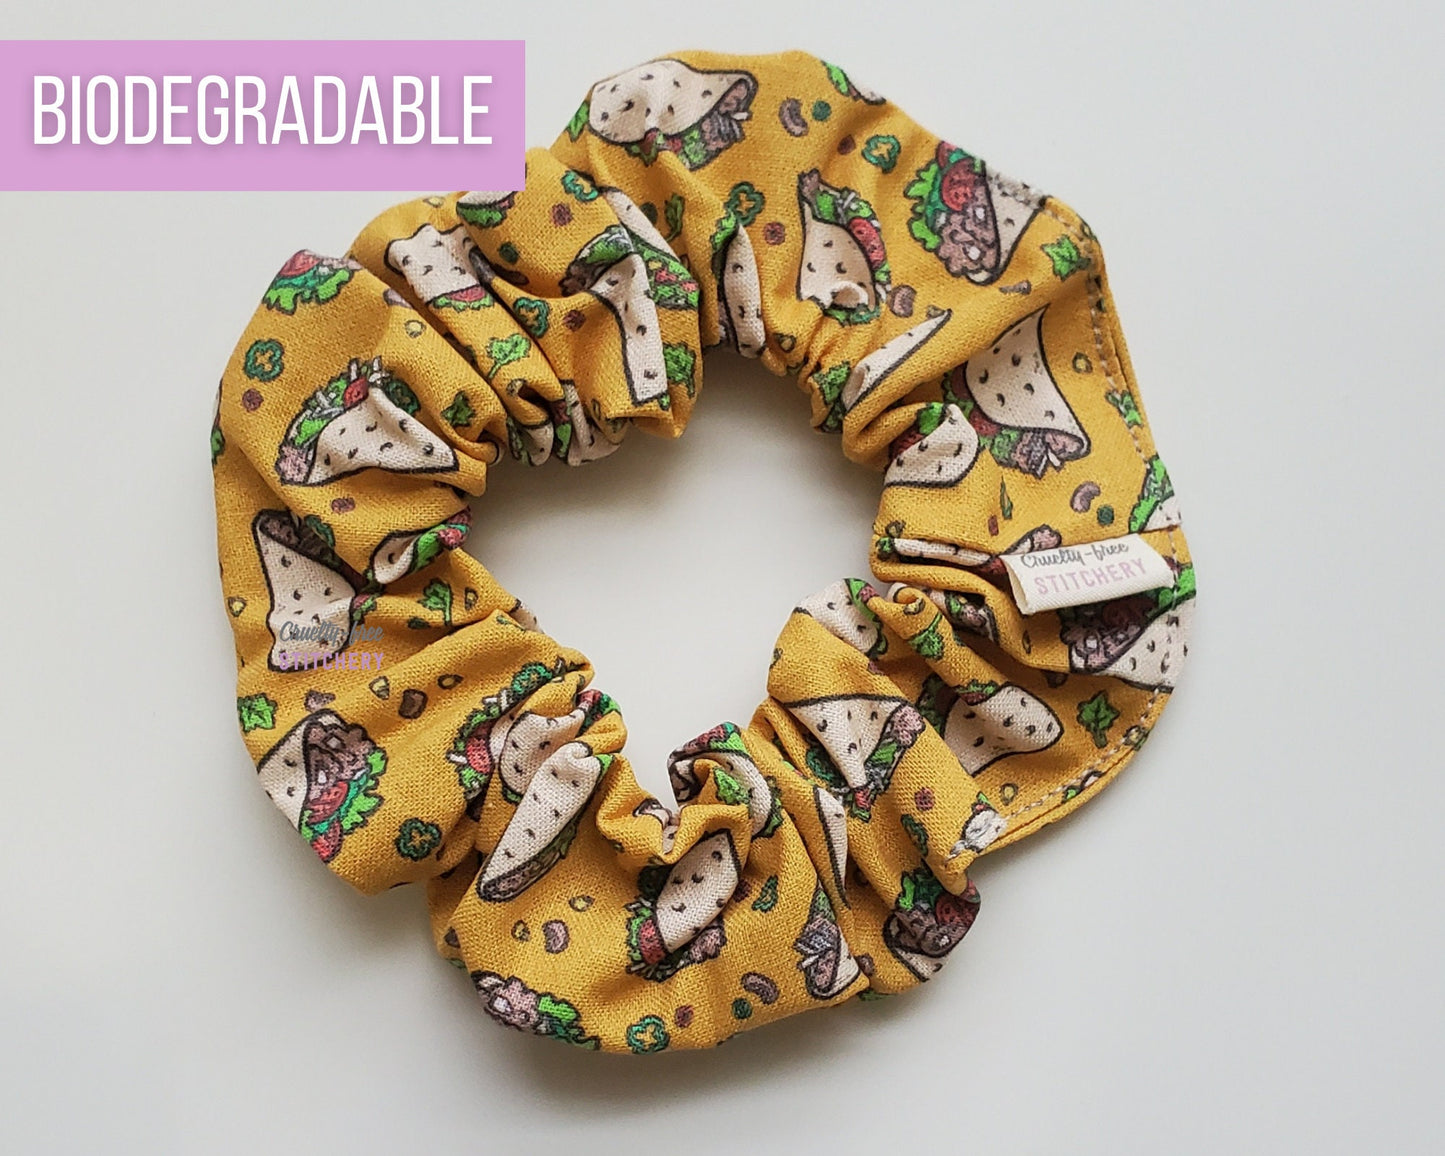 Mustard yellow scrunchie with cartoonish printed tacos. Tacos and fillings are scattered around.